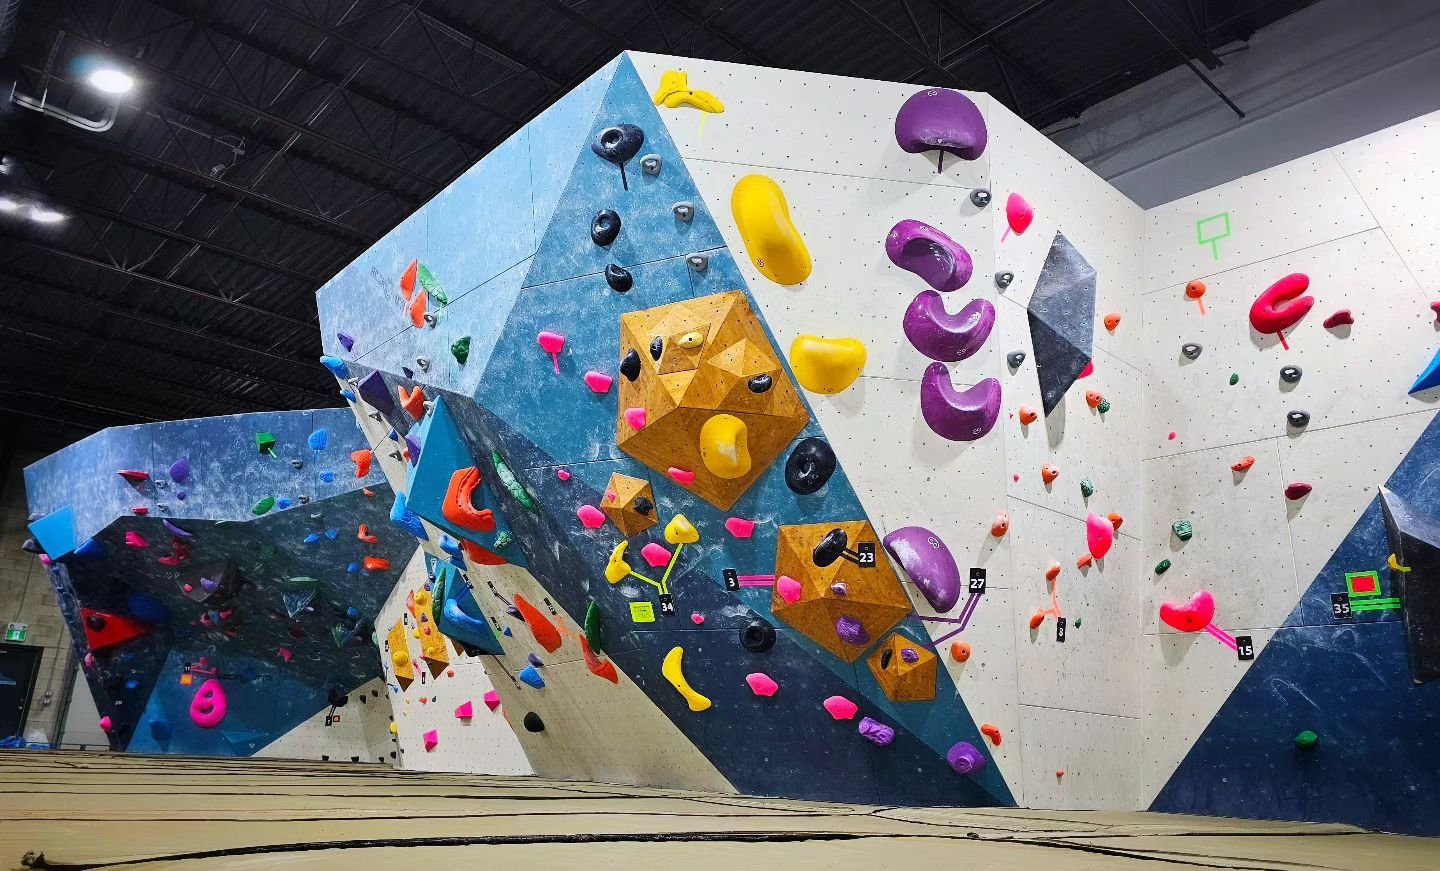 7 Year Party kicks off at noon! 🎉

12-5 Scramble &amp; Bingo Comp
3-8 BBQ (burgers, dogs, beyond meat, drinks)
6:30 raffle prizes
7 speed finals (top 3 m/w in intermediate and advanced qualify)
7:30-11 Climb &amp; Party

Free with membership or day 